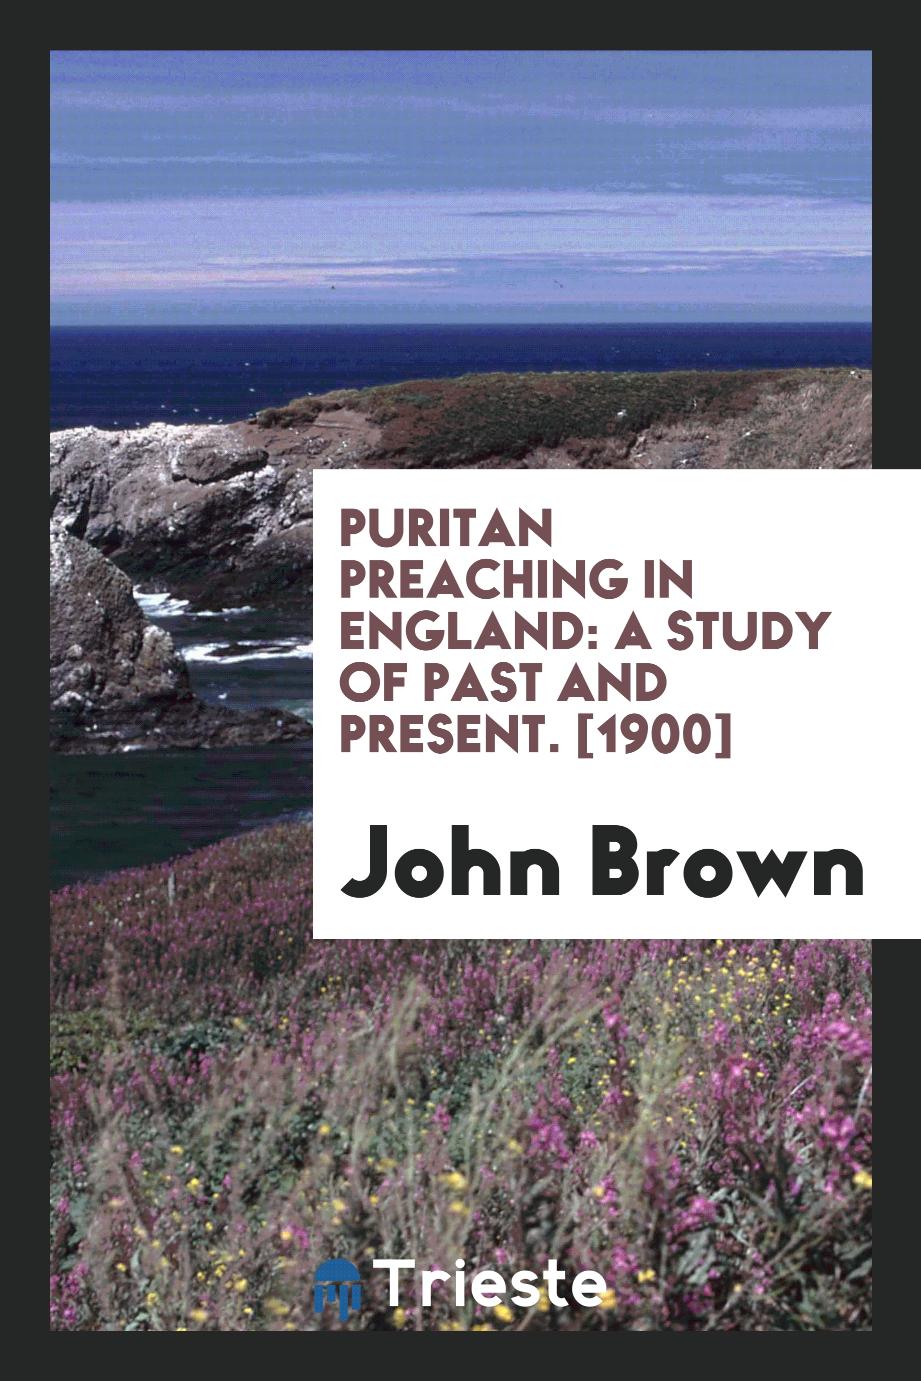 John Brown - Puritan Preaching in England: A Study of Past and Present. [1900]